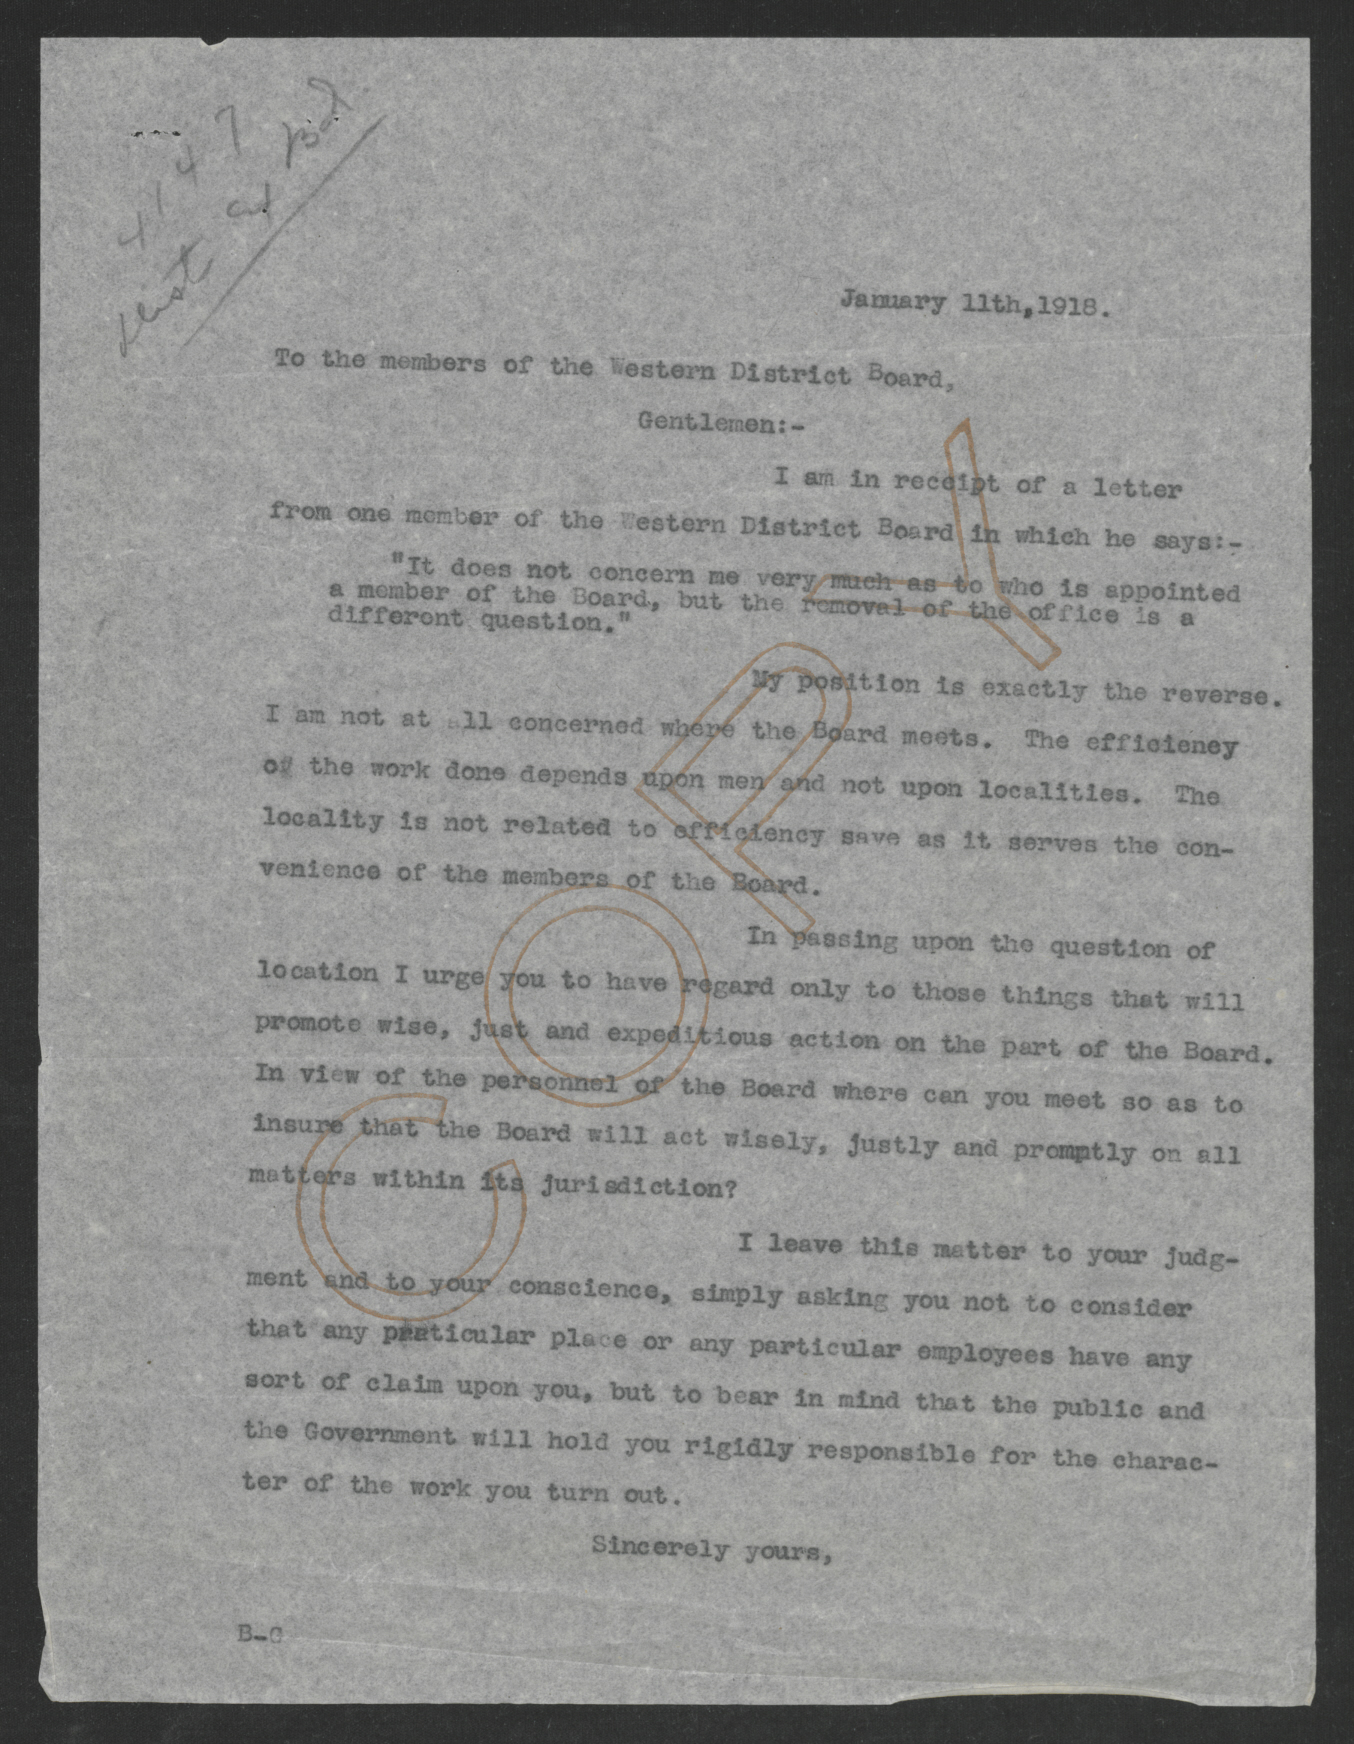 Letter from Thomas W. Bickett to the Members of the Western District Board, January 11, 1918